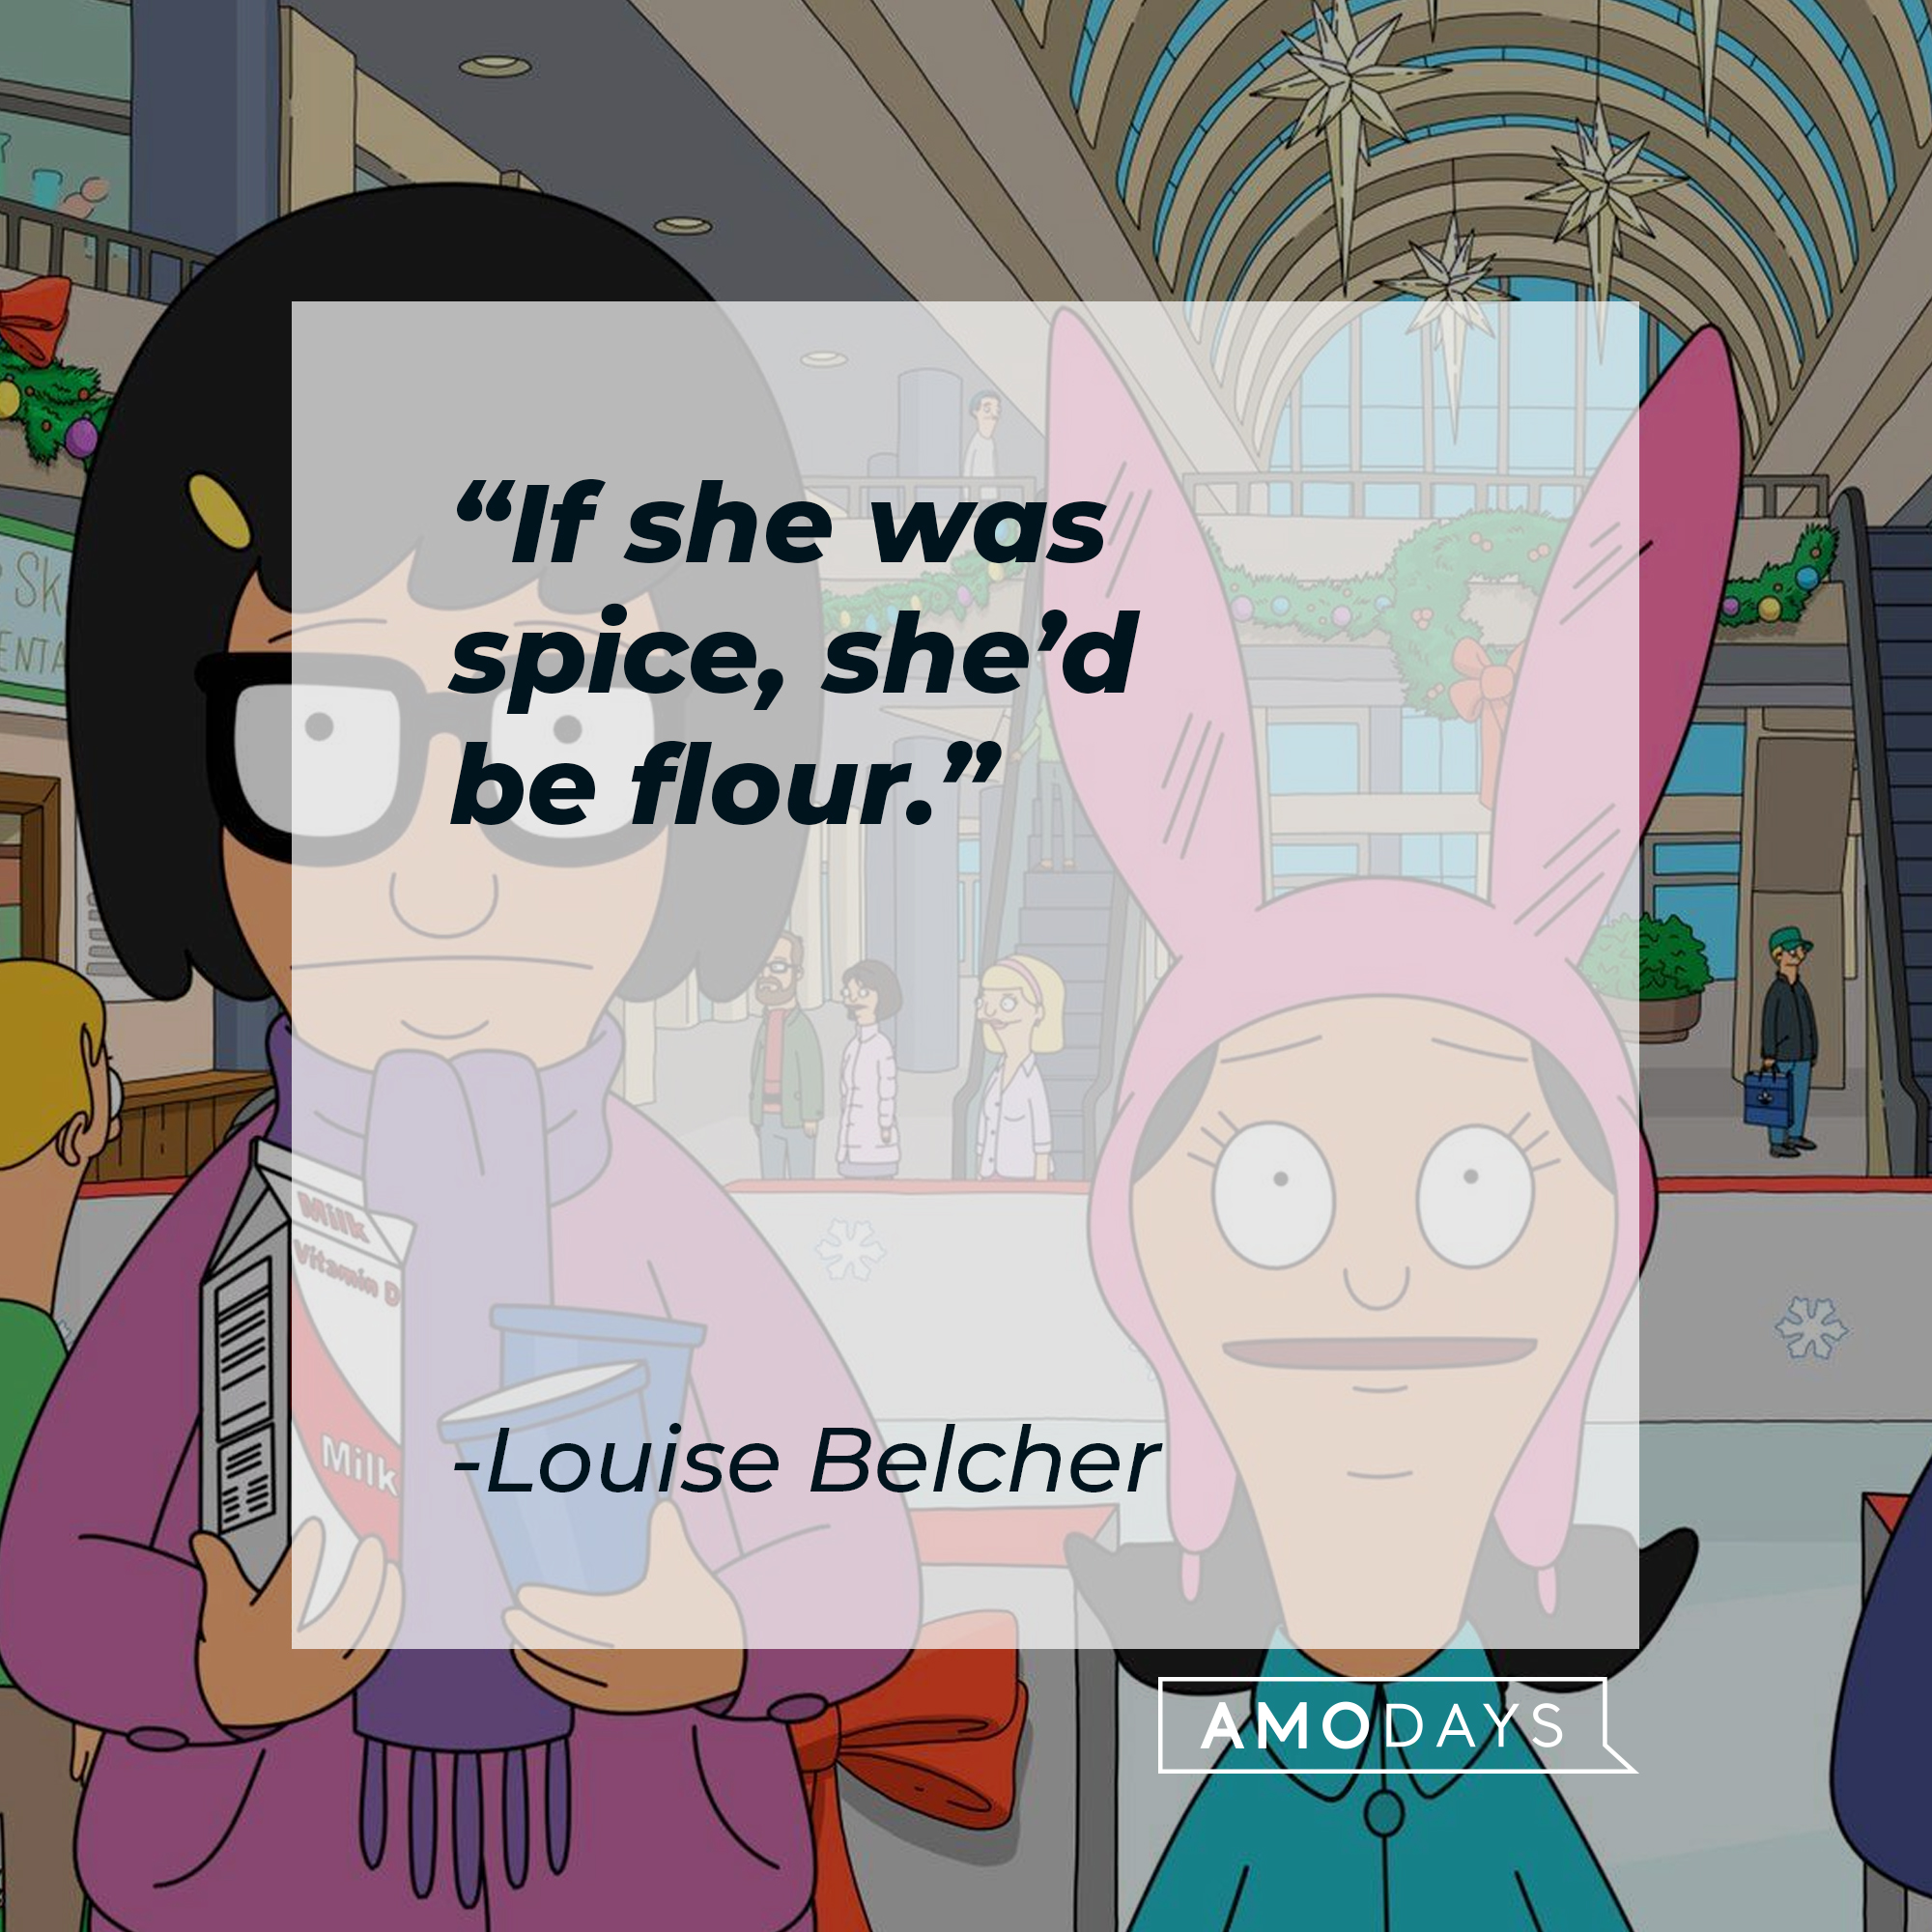 Louise and Tina Belcher with Louise’s quote: “If she was spice, she’d be flour.”  | Source: Facebook.com/BobsBurgers